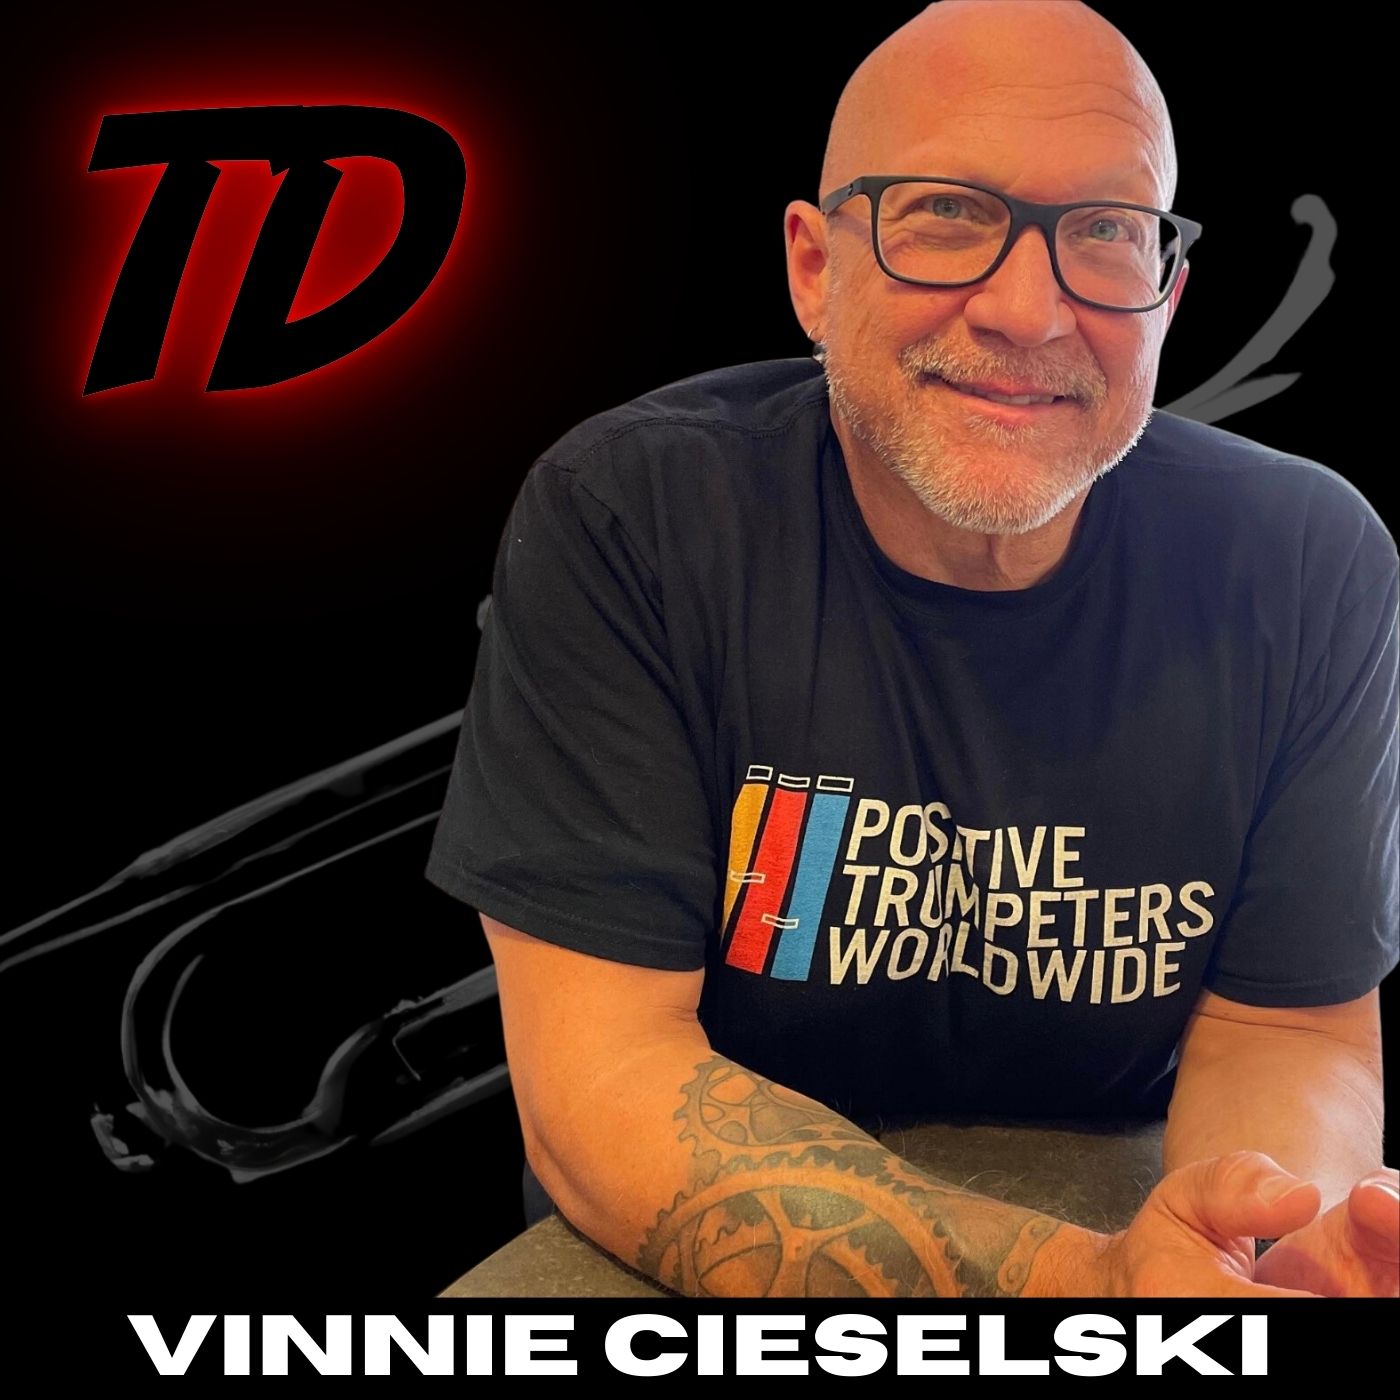 Playing With Feeling While You Can’t Feel Anything, Wasted Emotions, and Trumpet as a Higher Calling with Vinnie Ciesielski! [Part 2 of 2]